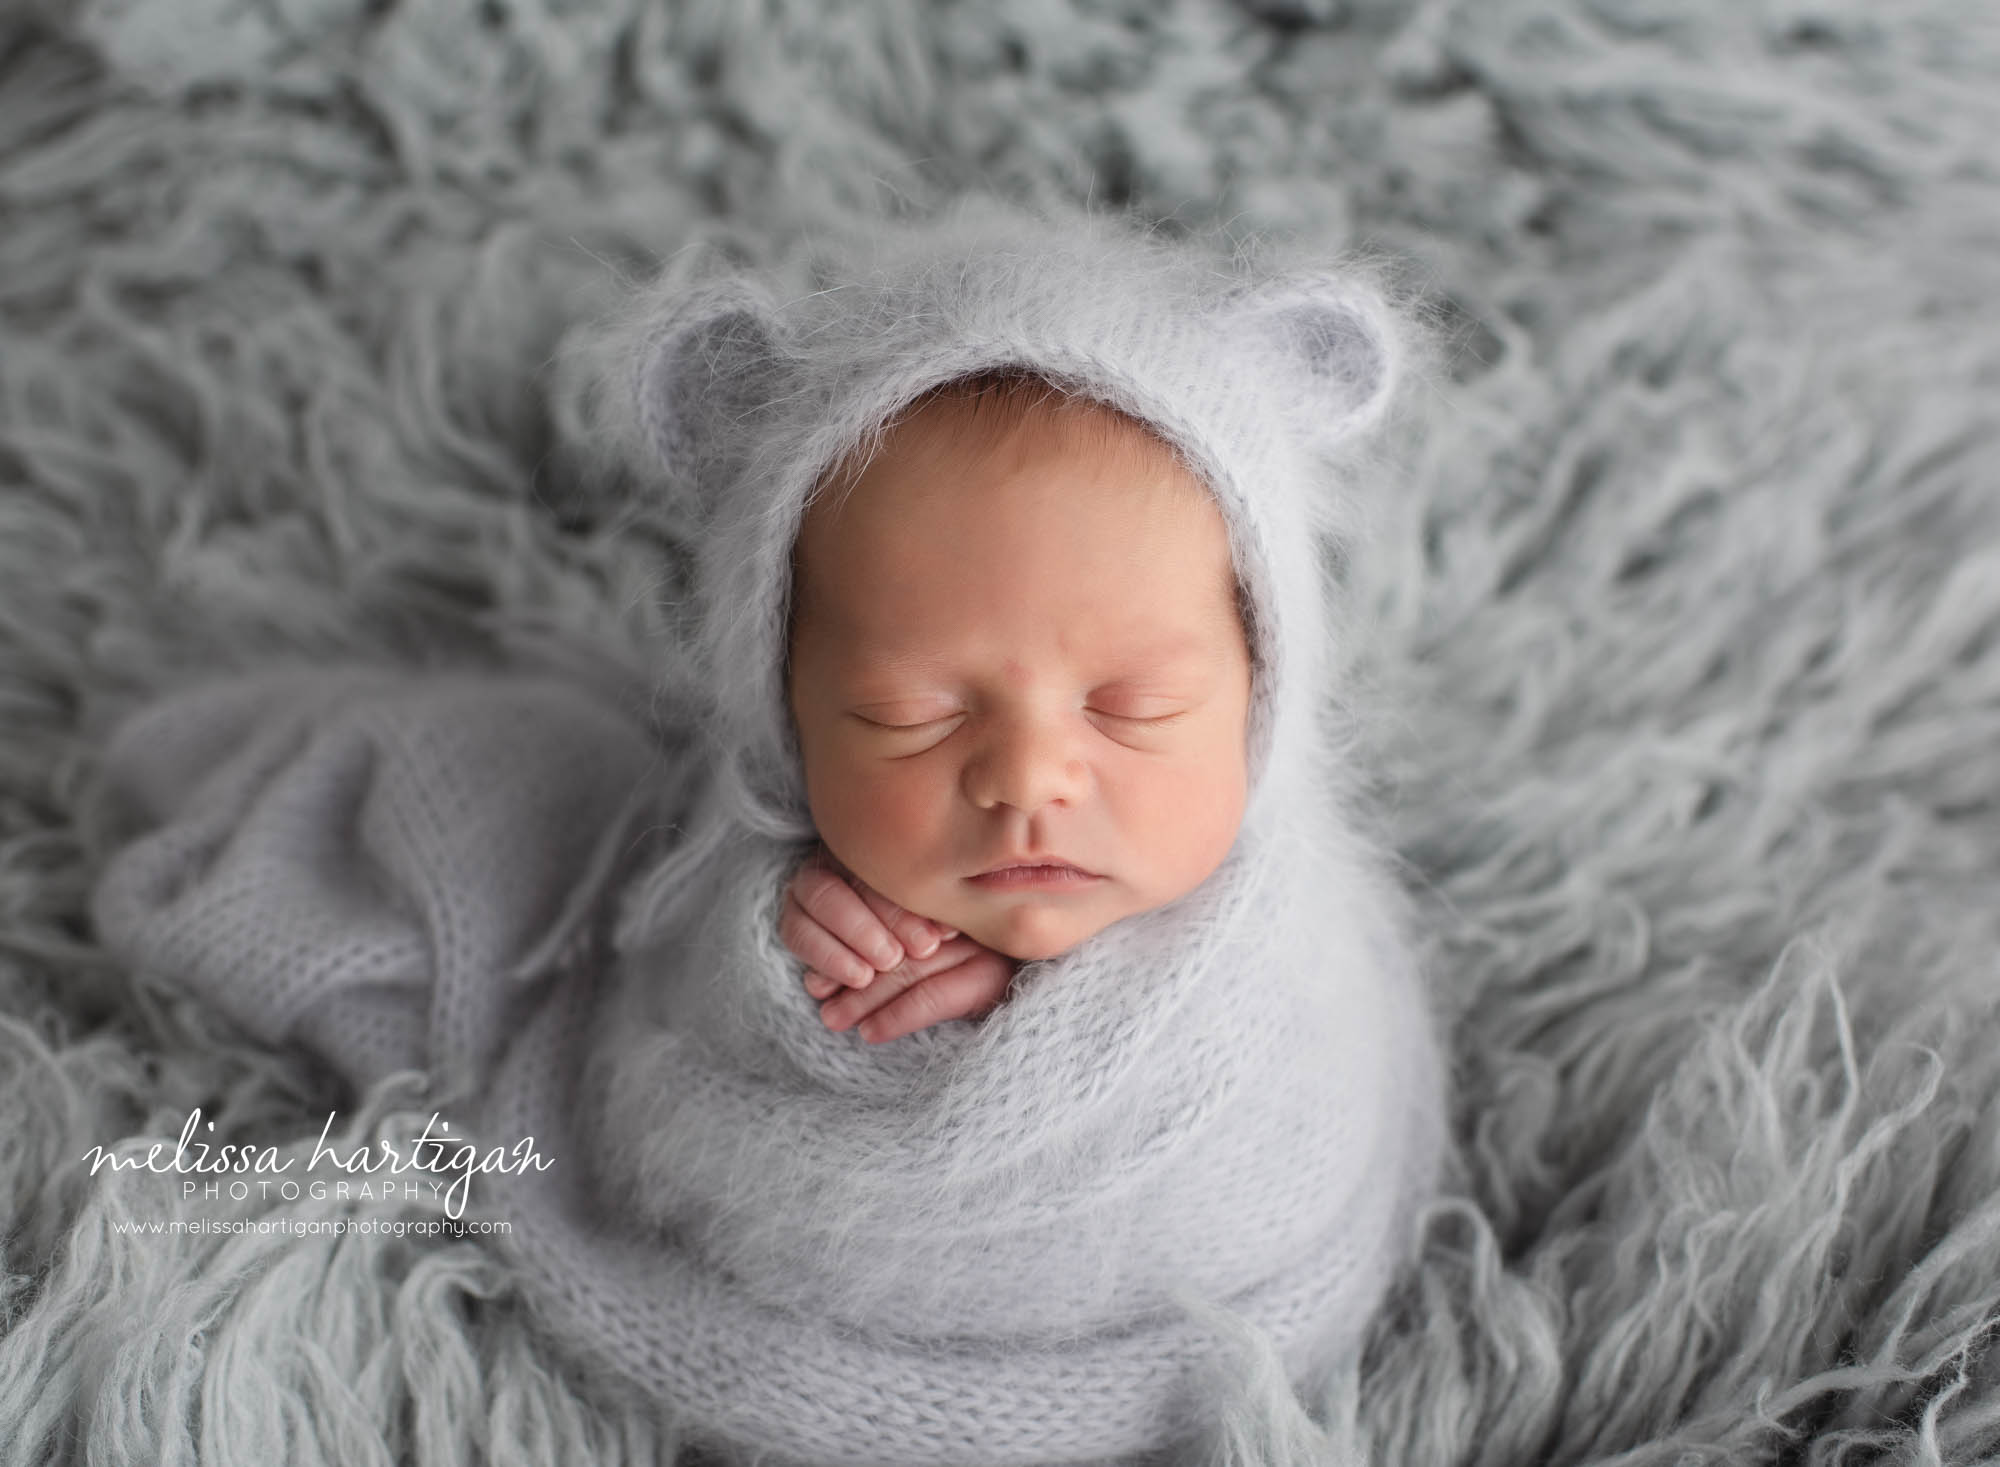 Baby boy wrapped in knitted light grey wrap and bear bonnet on grey flokati